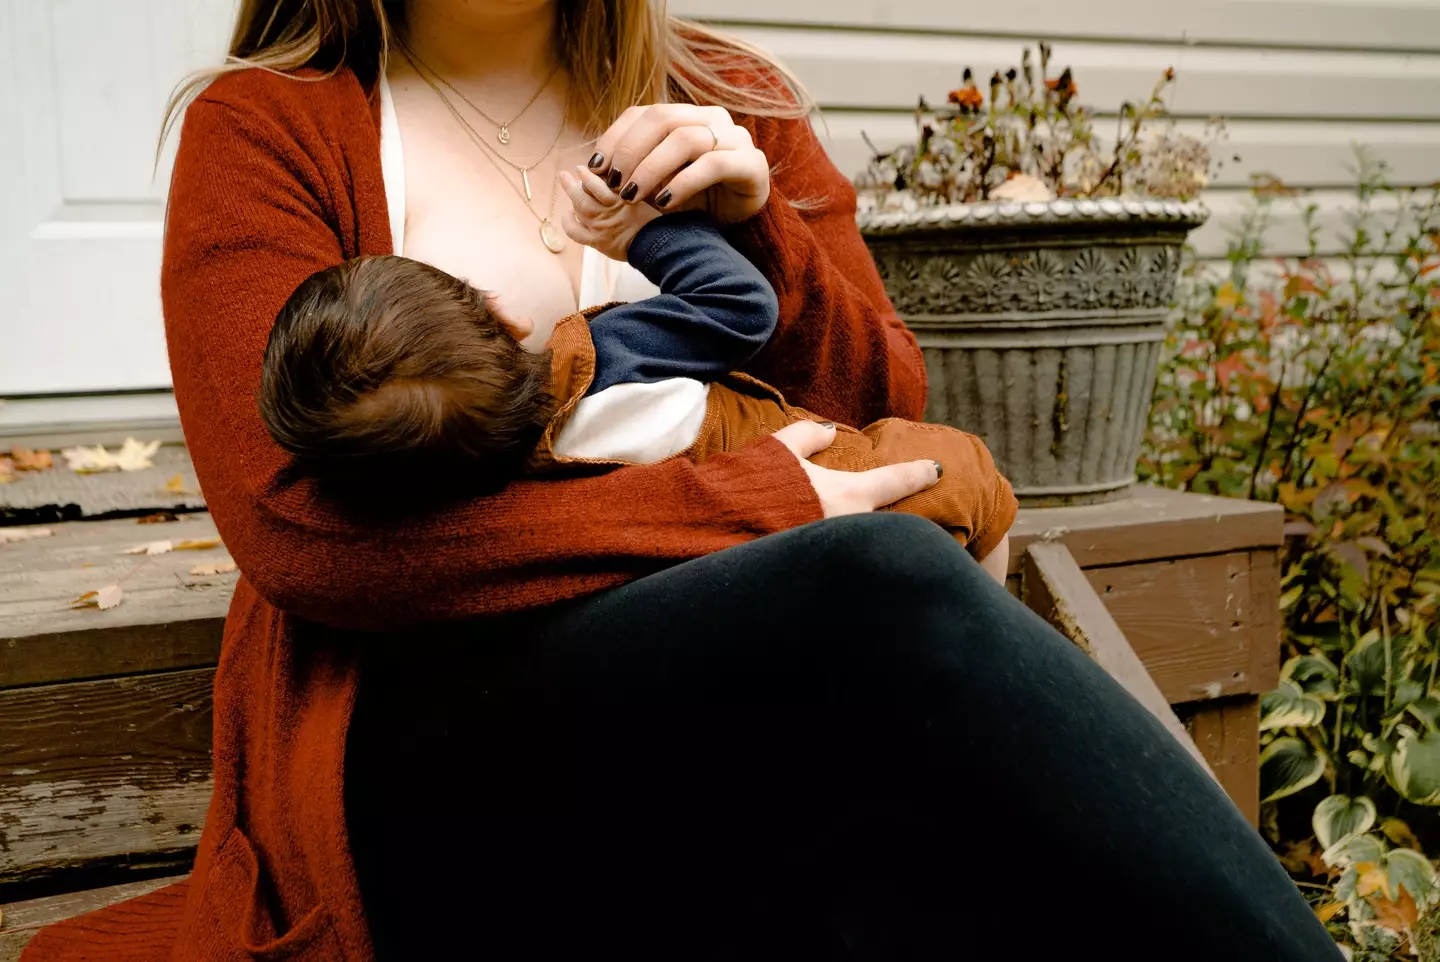 WHO recommends you exclusively breastfeed until six months (